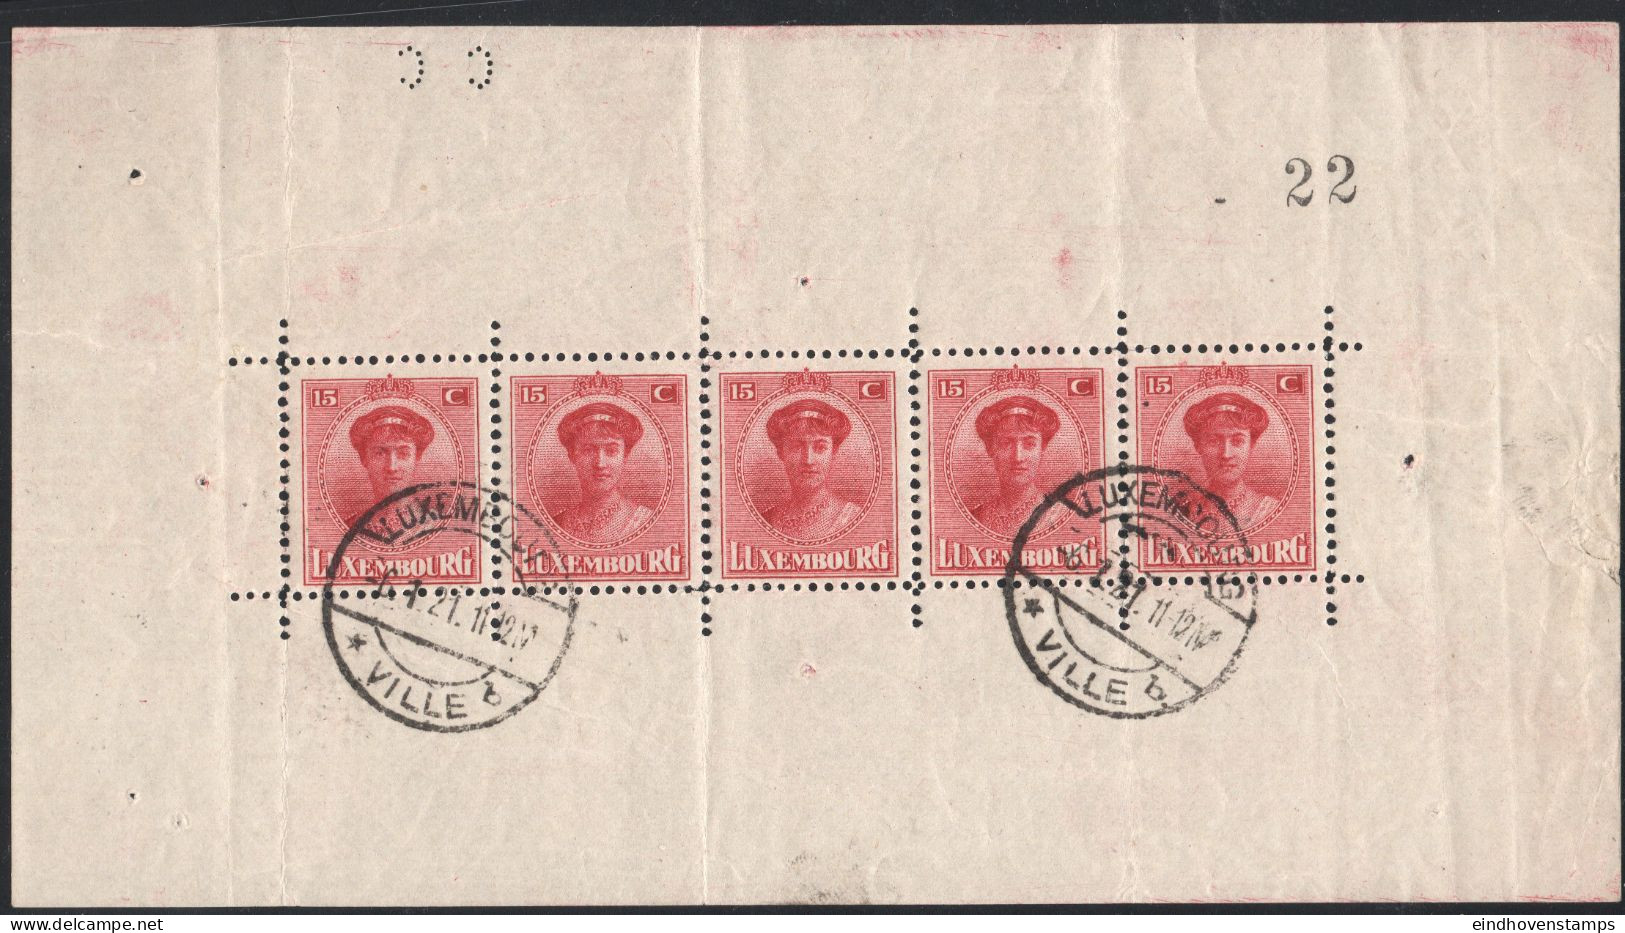 Luxemburg 1921 Jan 6 Minisheet Of 5 Stamps Charlotte FDC Cancel Folds And Usual Wrinkles Outside The Stamps - 1921-27 Charlotte Voorzijde